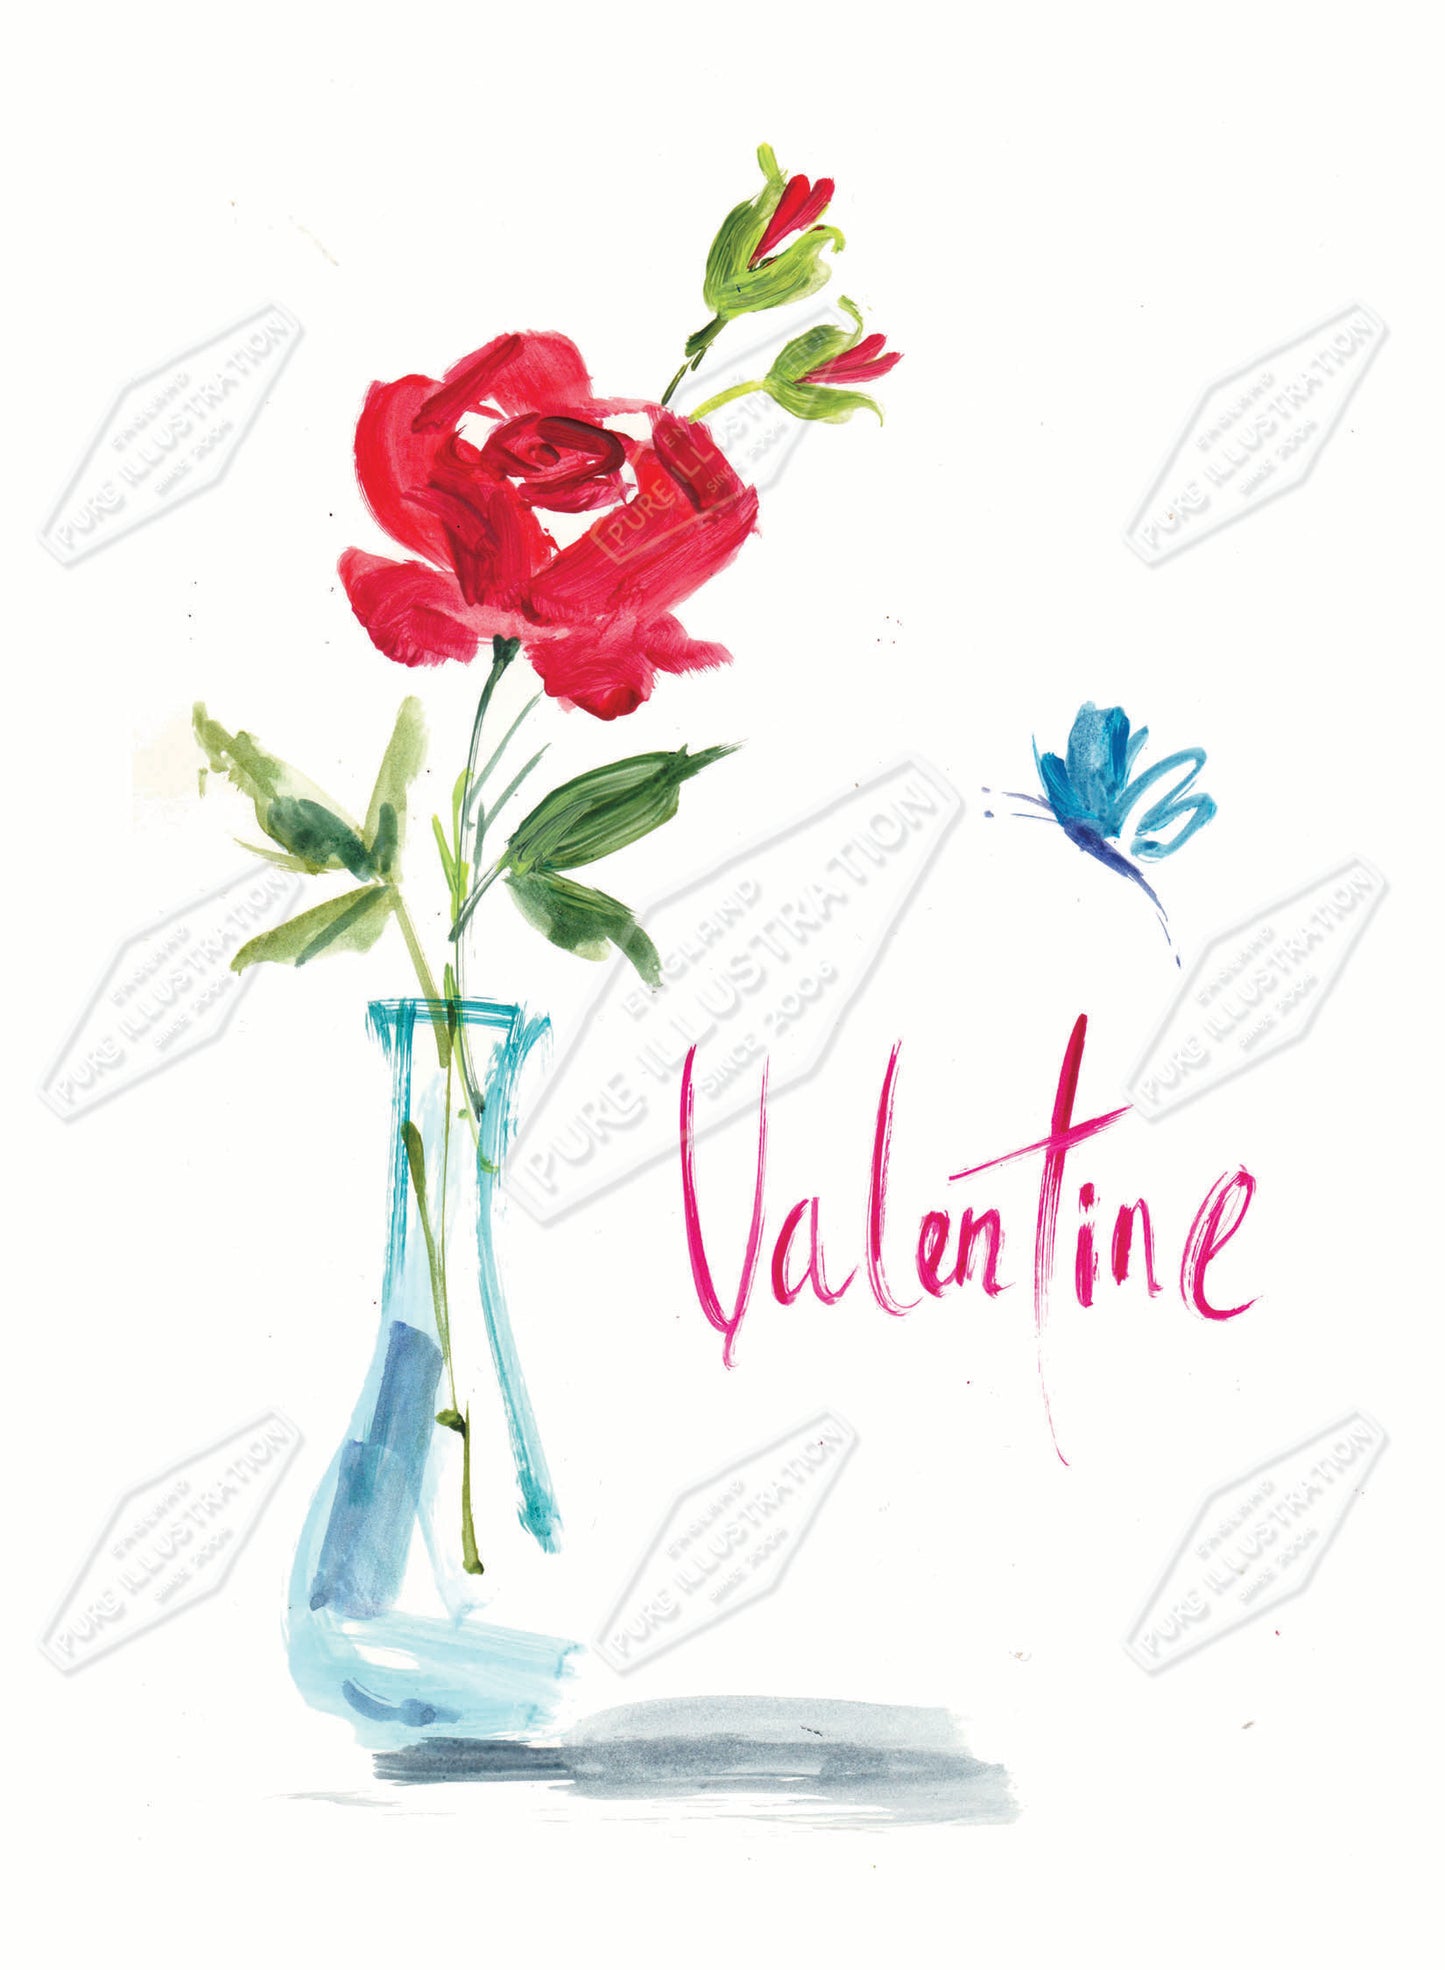 00035811AMA - Ally Marie is represented by Pure Art Licensing Agency - Valentine's Day Greeting Card Design